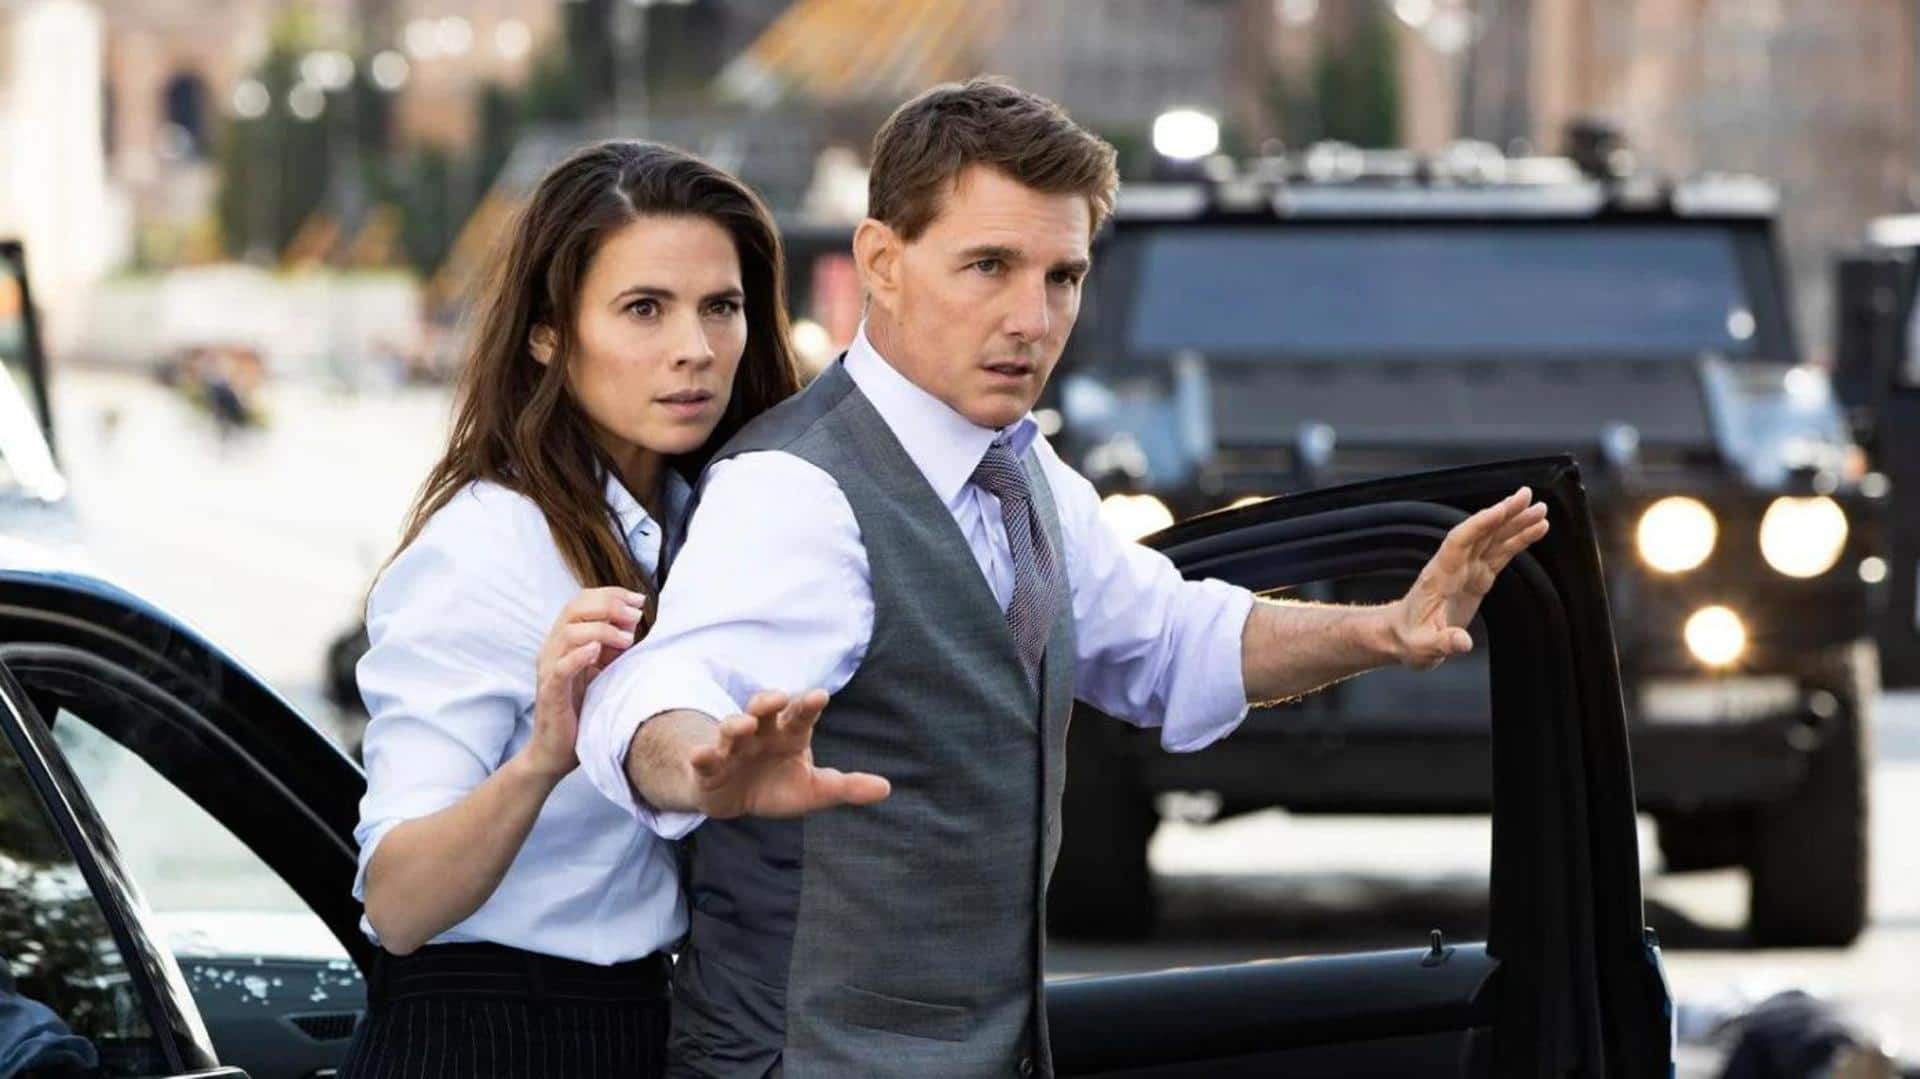 #BoxOfficeBuzz: Tom Cruise's 'Mission: Impossible 7' aims $250M opening globally